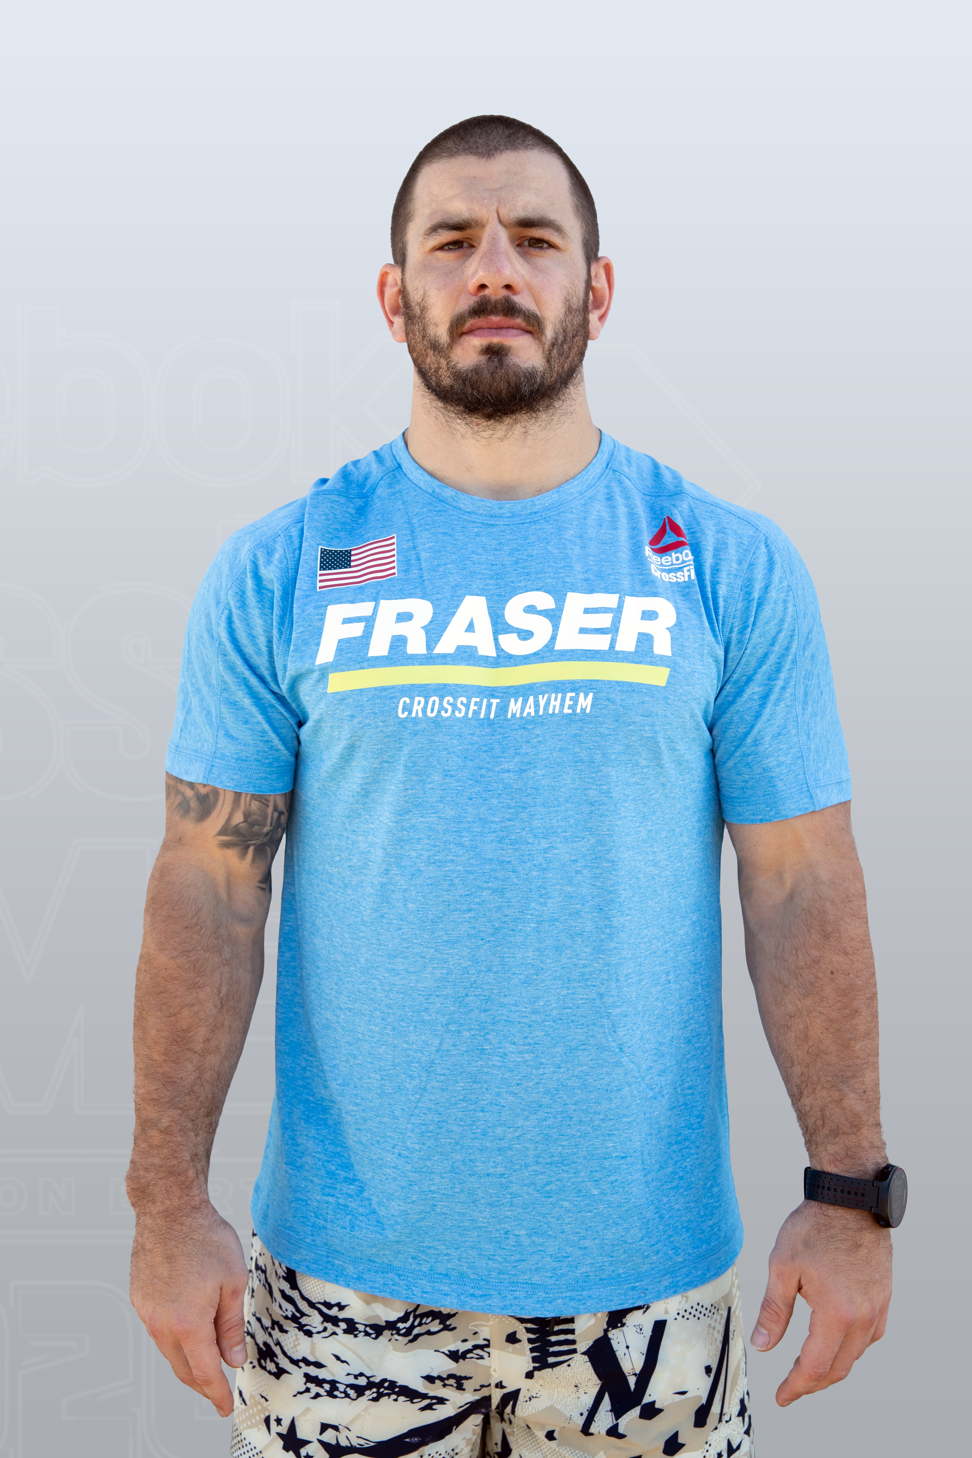 CrossFit 2020 day two: Mat Fraser wins every event, has unbeatable lead for 'Fittest on Earth' | South Morning